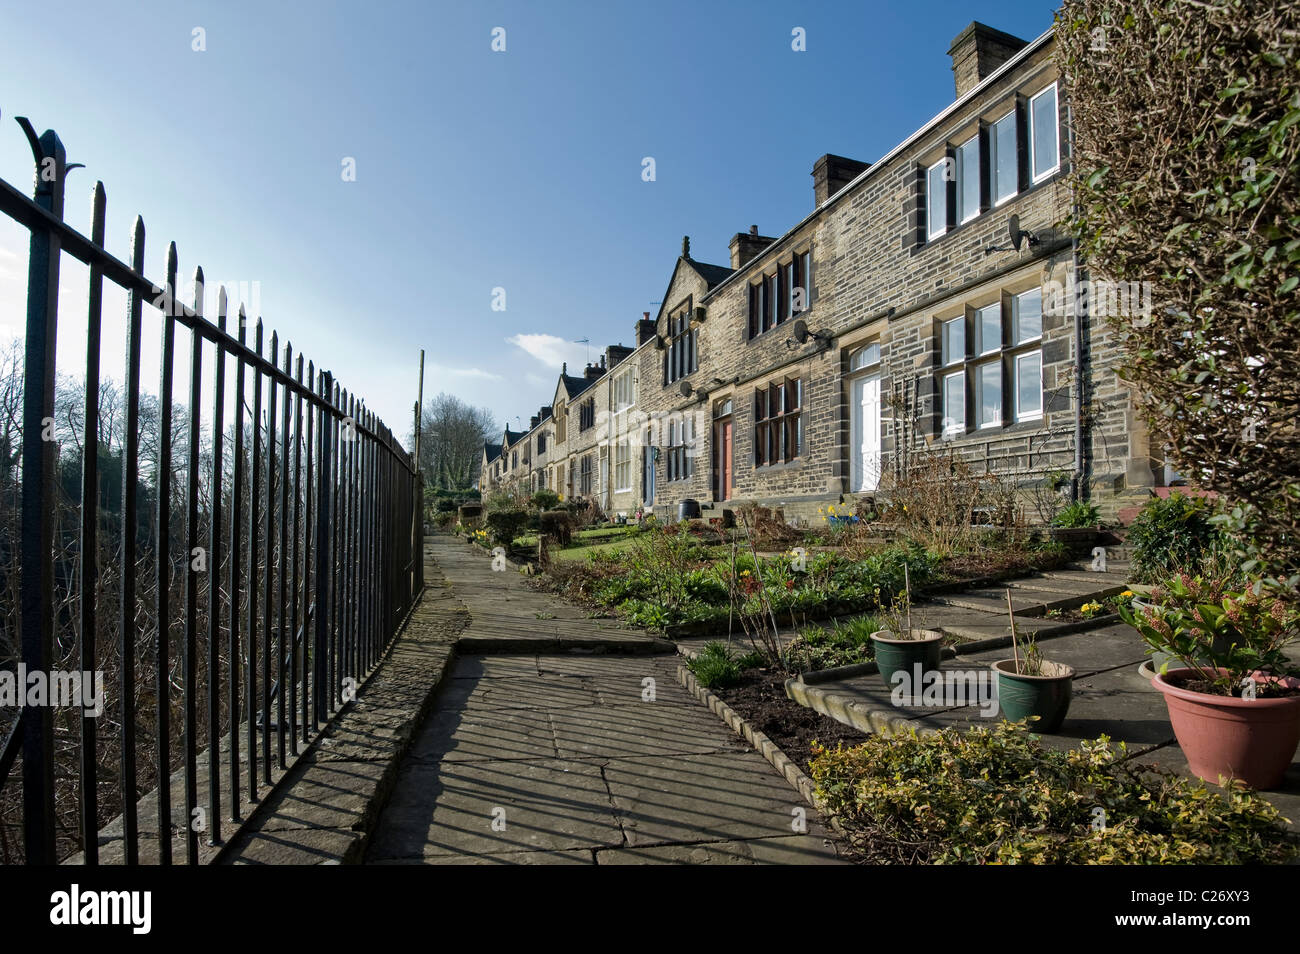 Stone built victorian housing with metal fencing on stone flags. Stock Photo